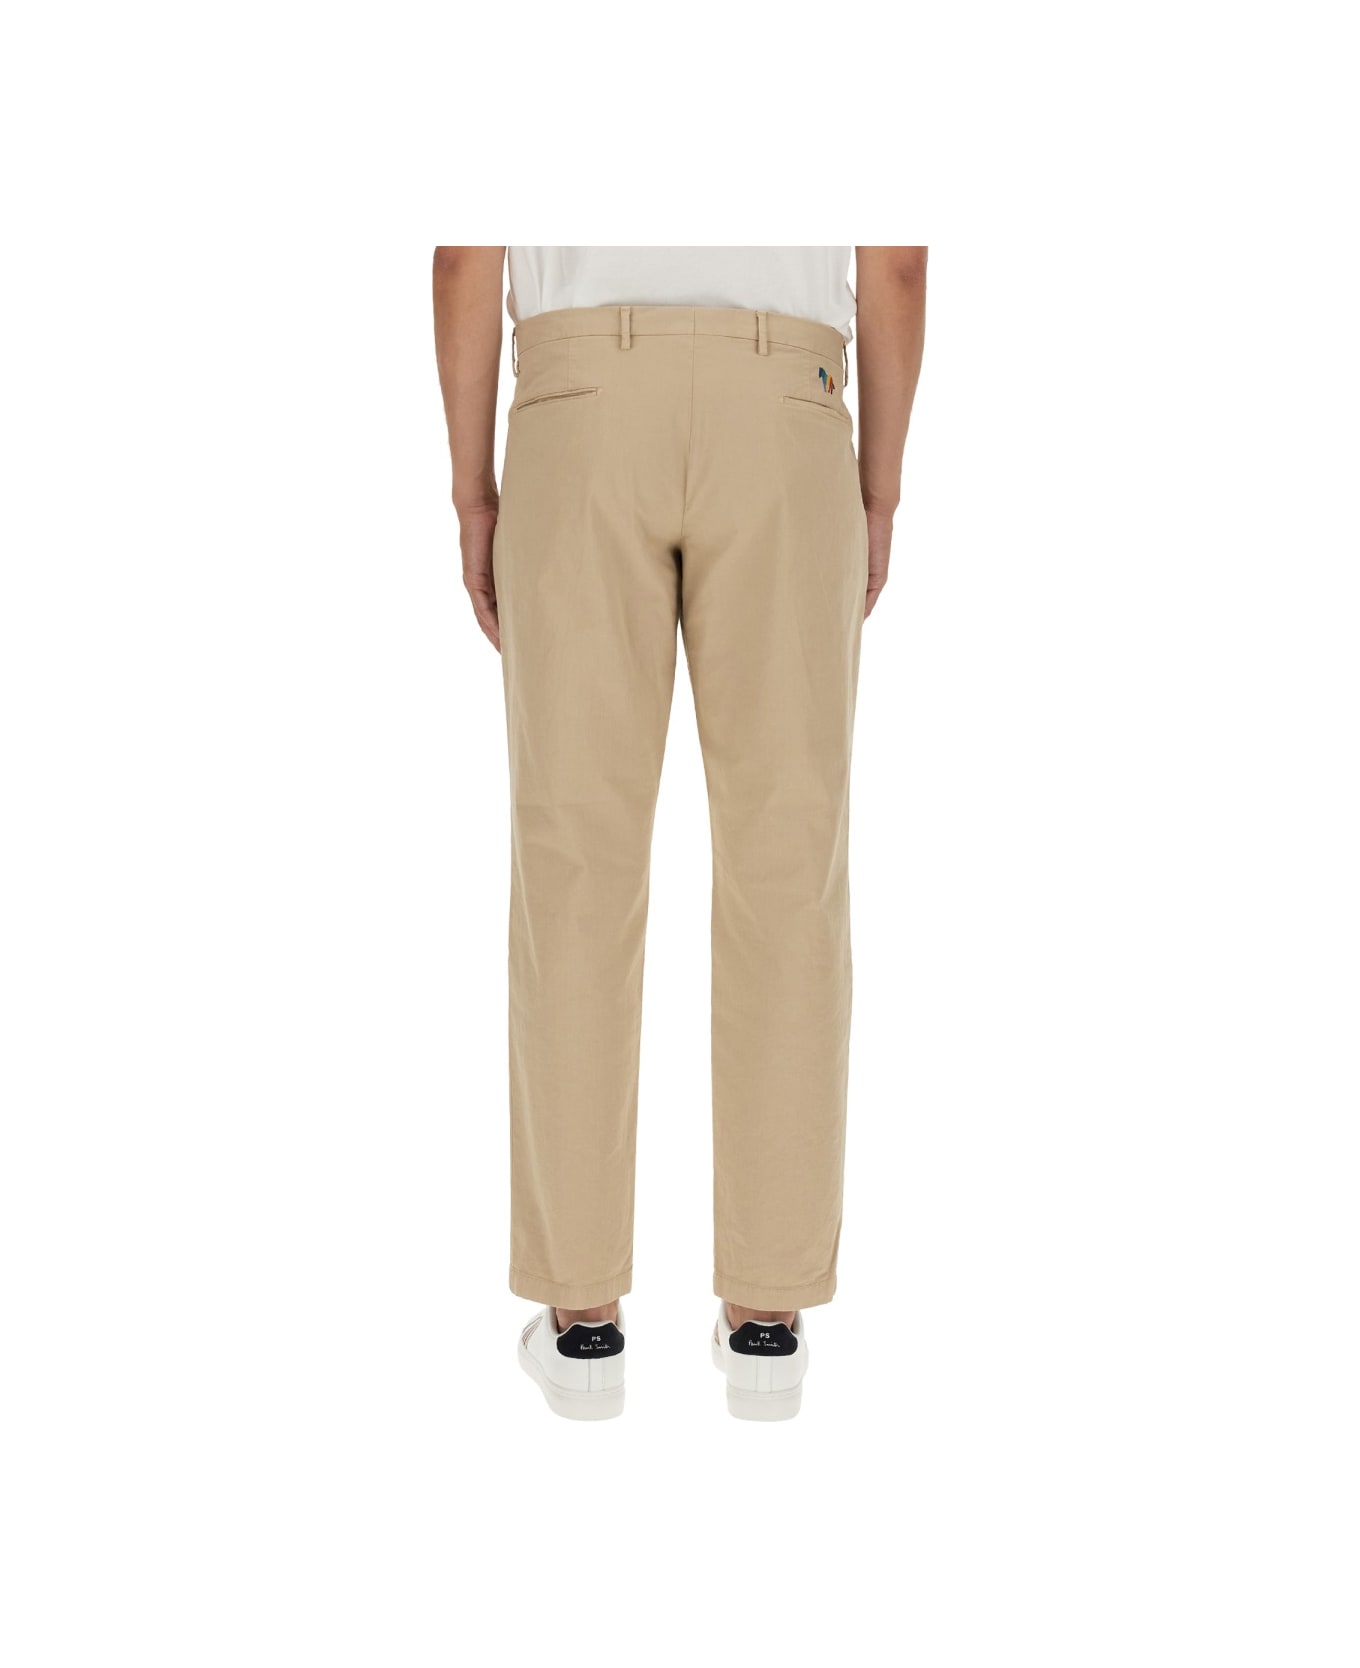 PS by Paul Smith Regular Fit Pants - BEIGE ボトムス